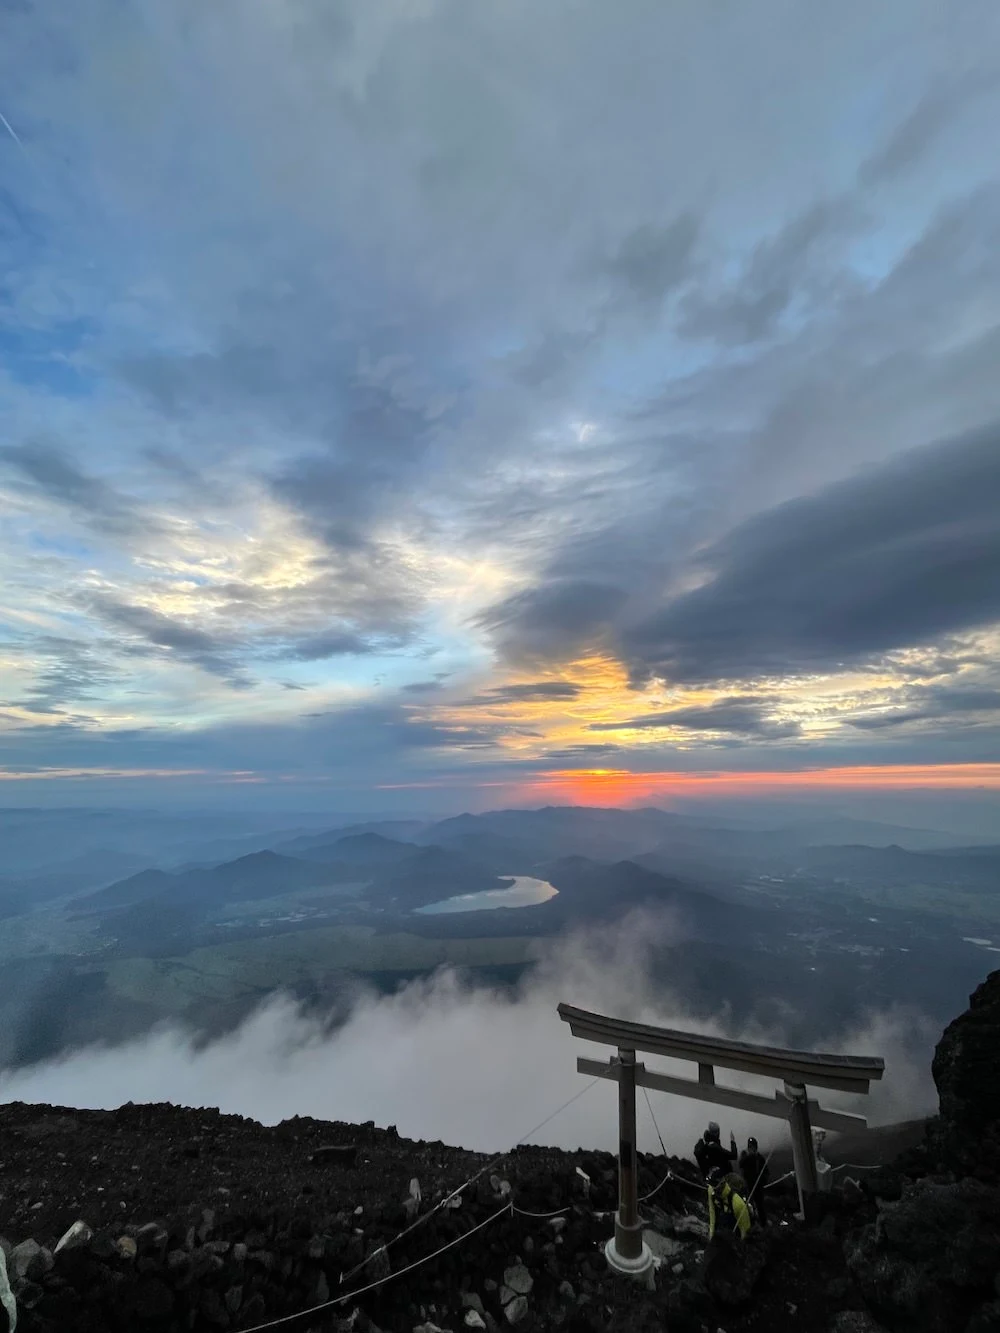 The sunrise seen from the summit of Mt. Fuji